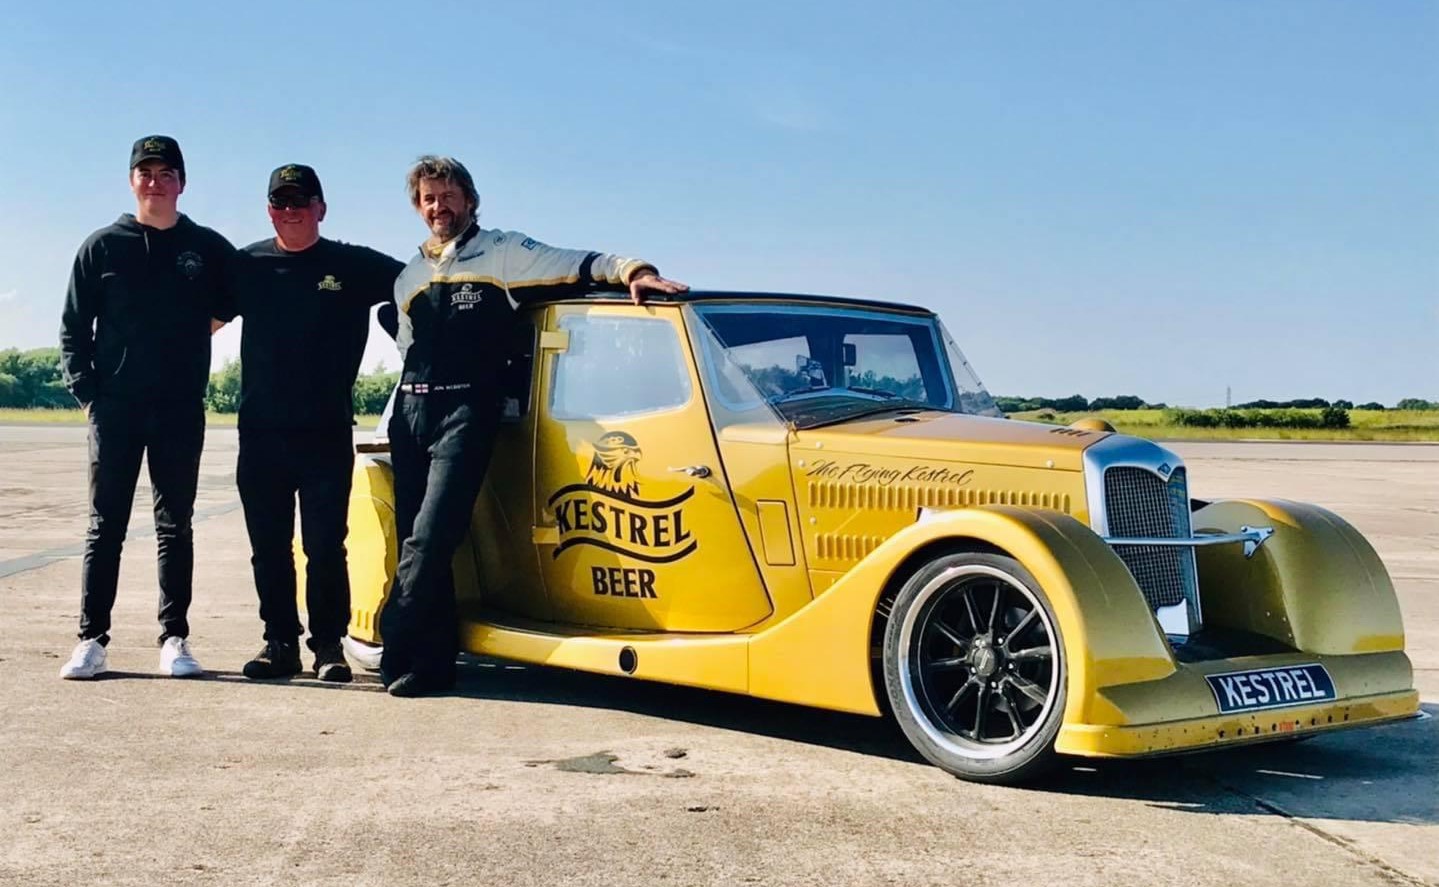 Kestrel Beer’s 1935 British classic smashes land speed record